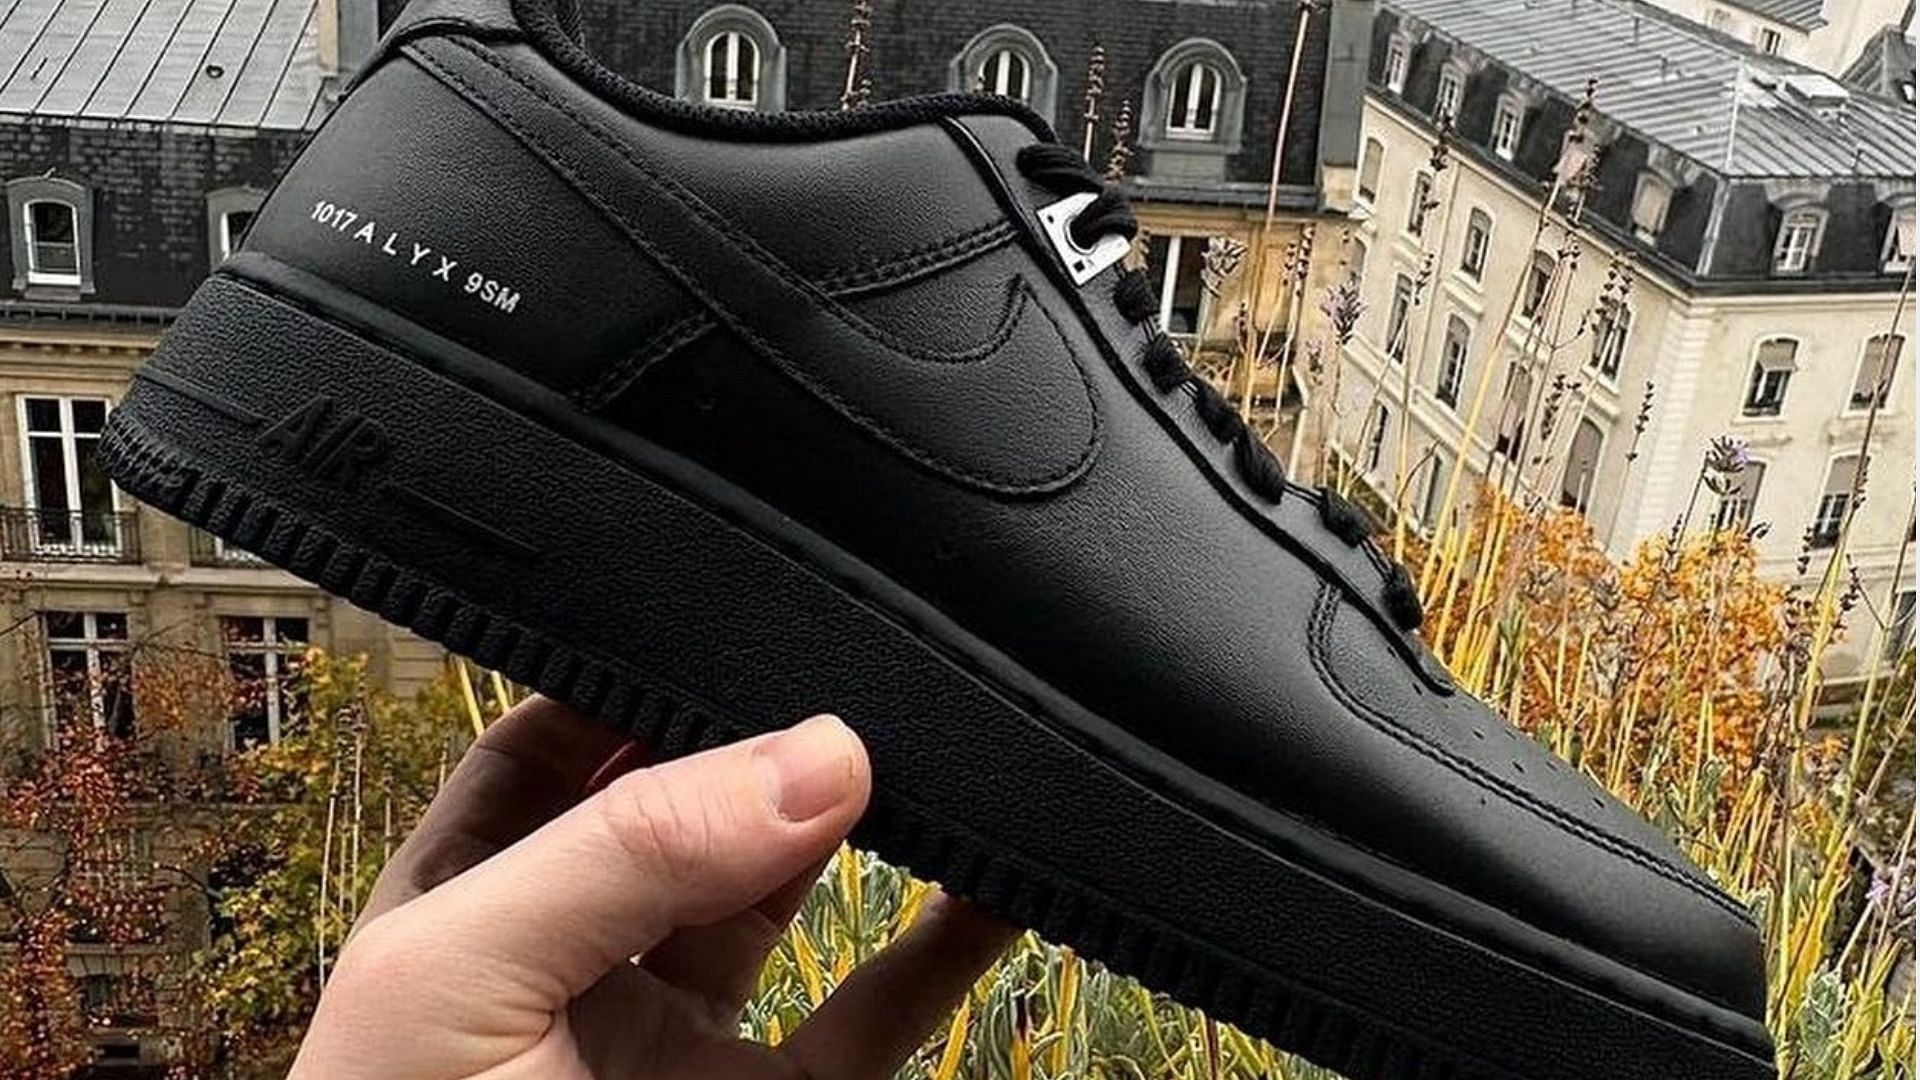 Take a closer look at the black variant of the upcoming Nike Air Force 1 Low shoes (Image via Instagram/@matthewmwilliams)